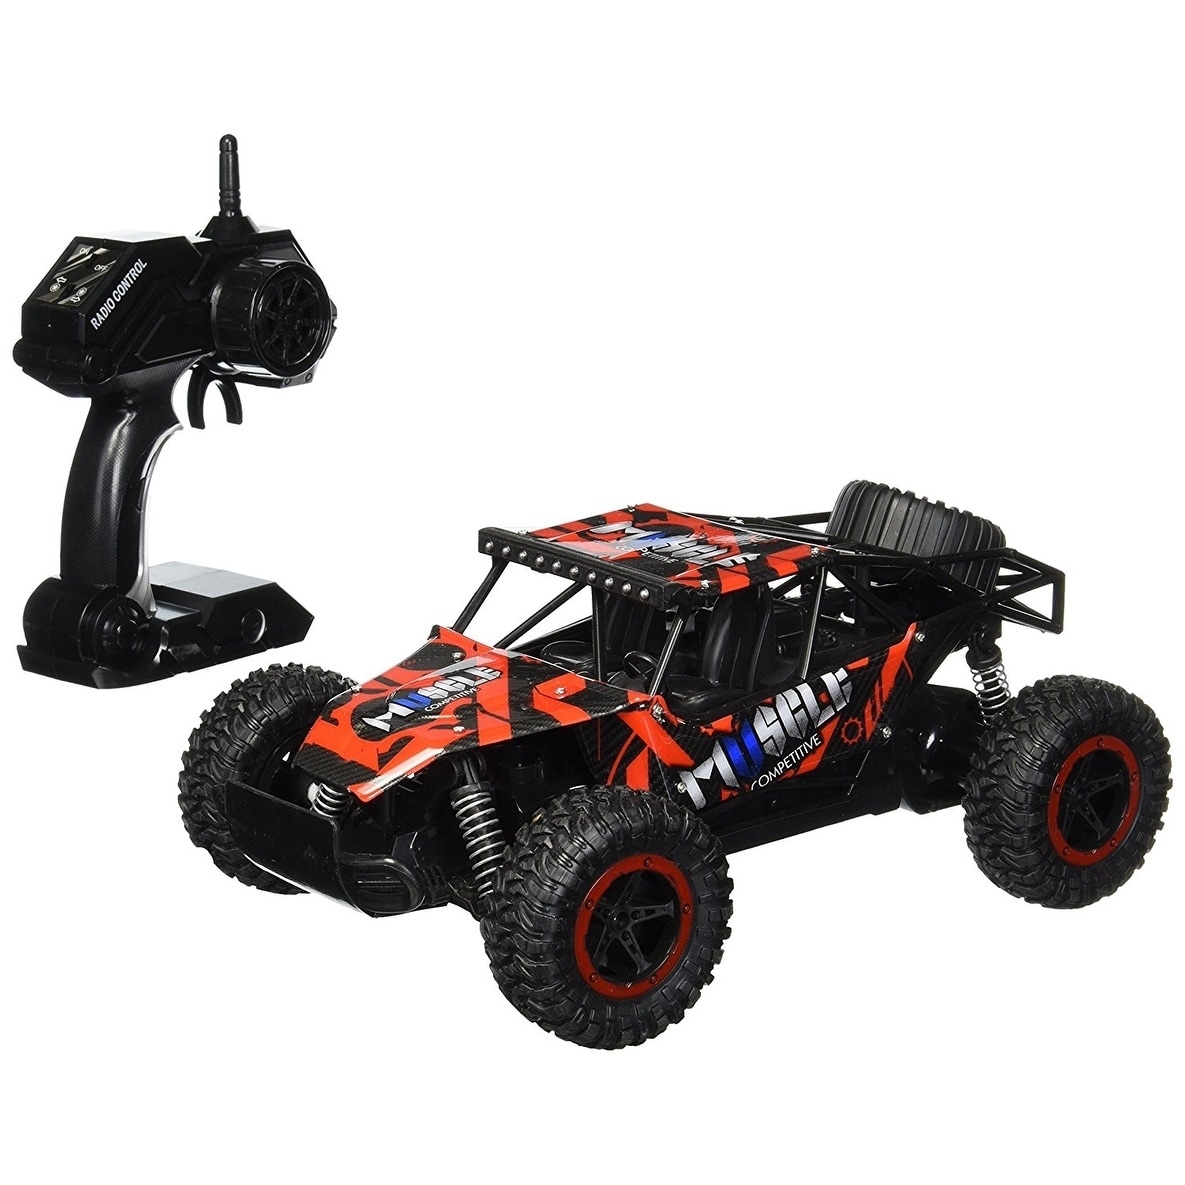 4wd cross country buggy